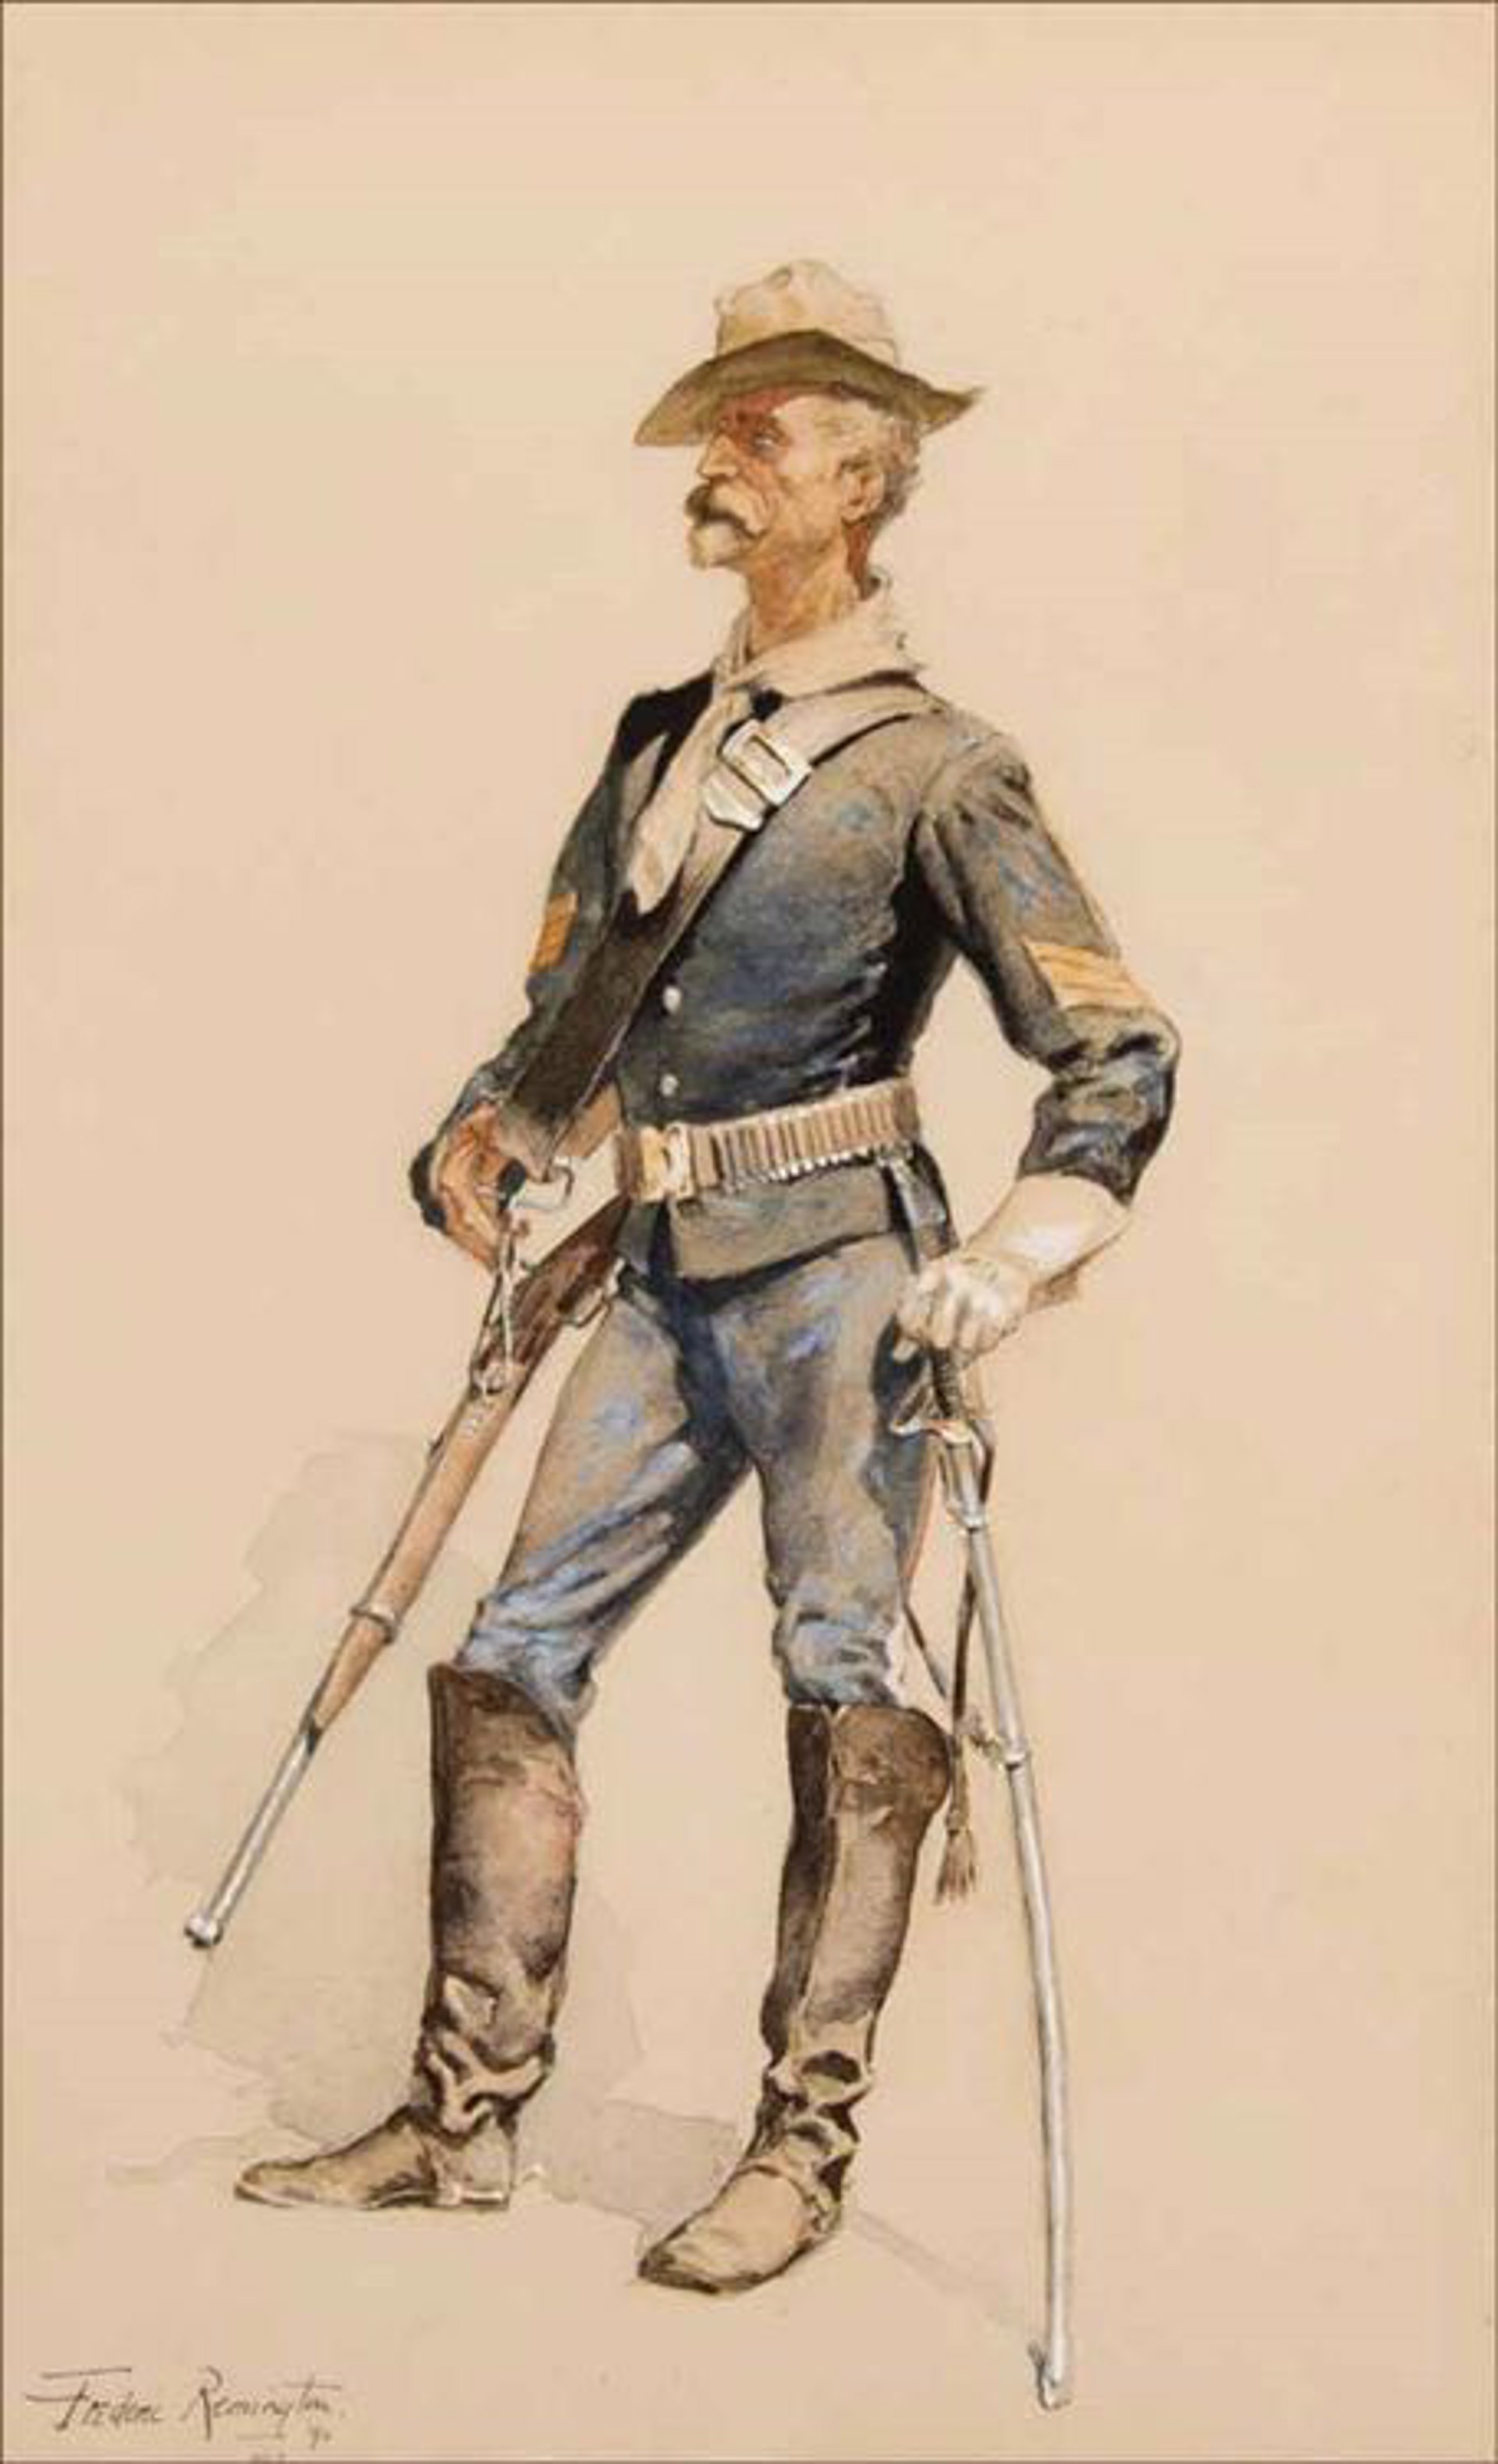 A TYPICAL TROOPER by Frederic Remington [1861-1909]